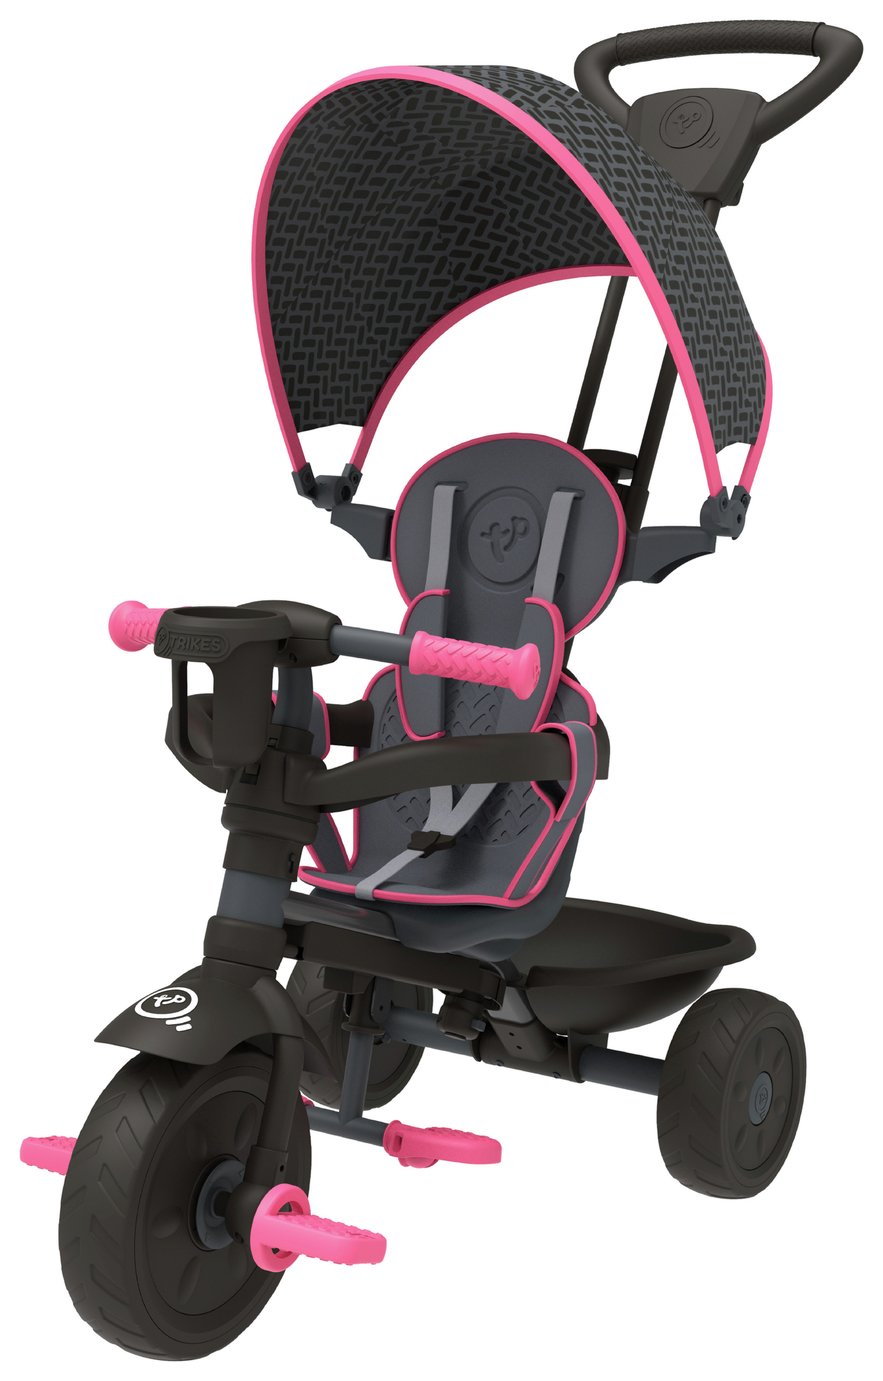 TP 4 in 1 Trike Review